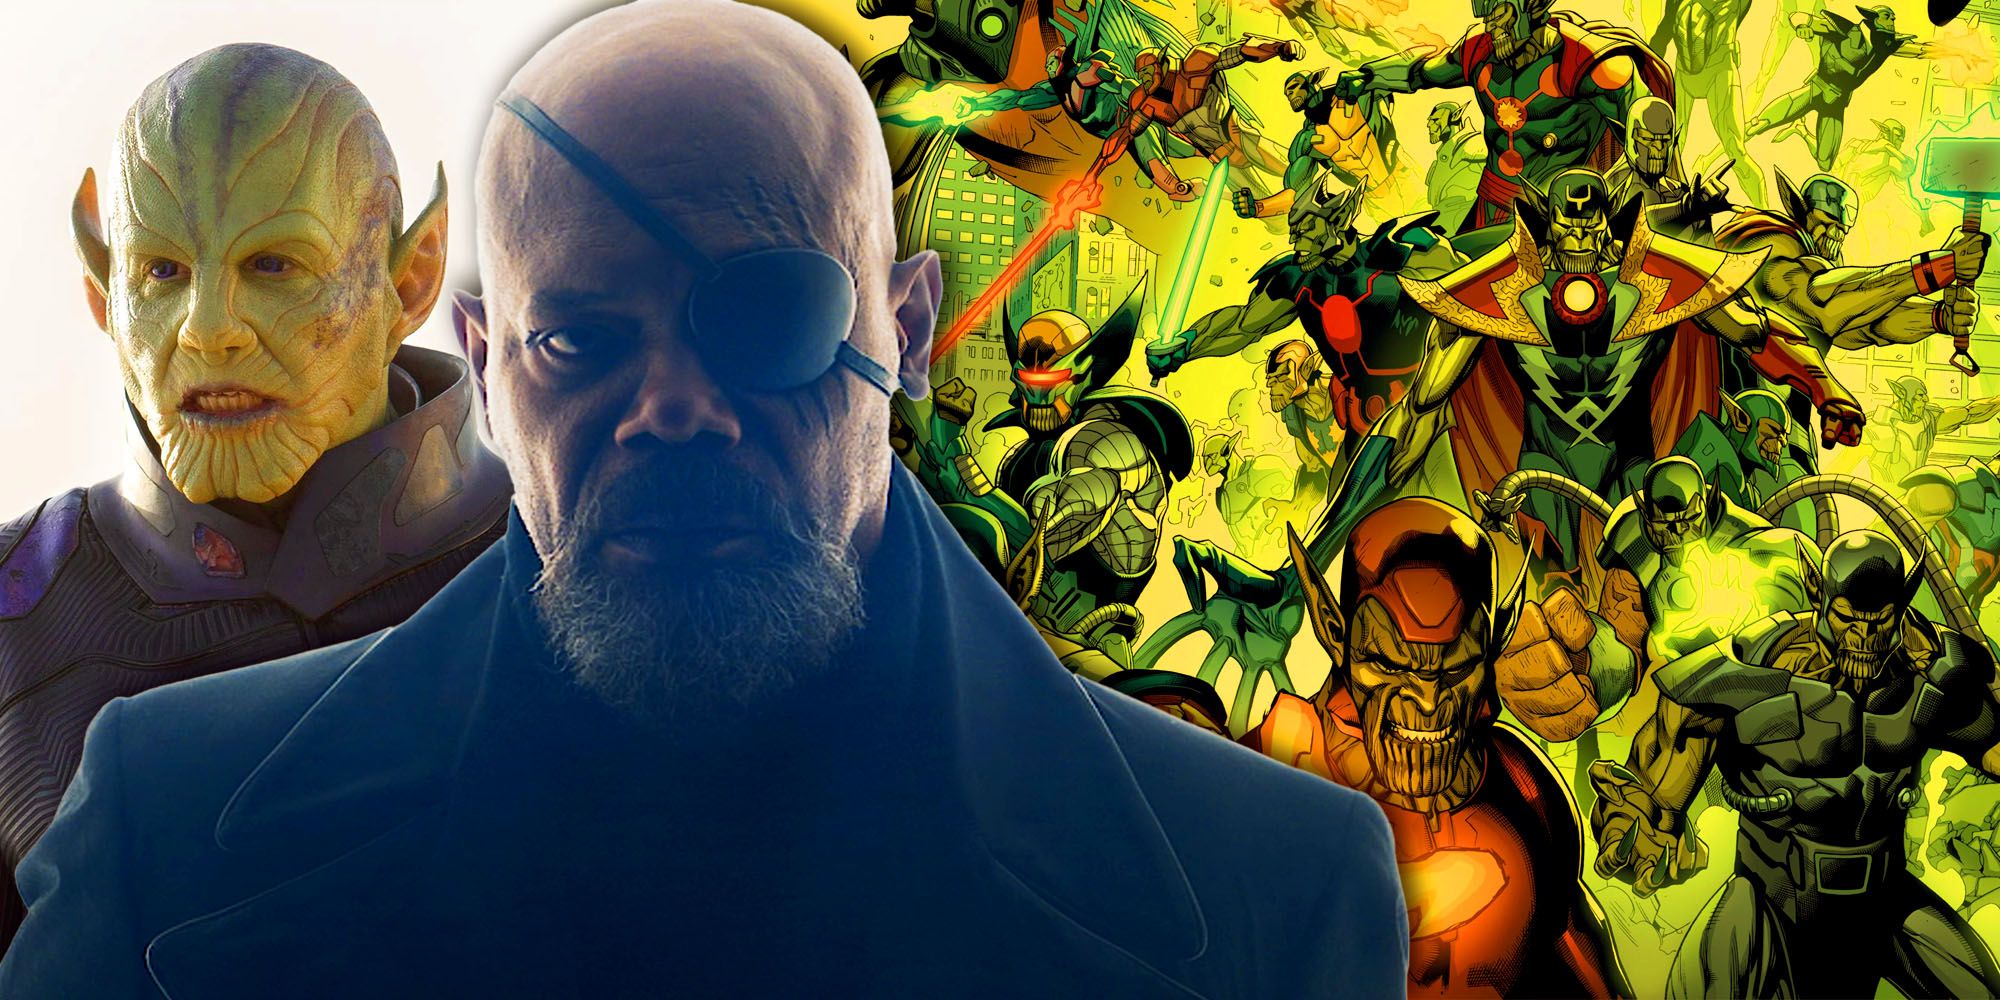 nick fury and talos in the mcu with the secret invasion story in marvel comics